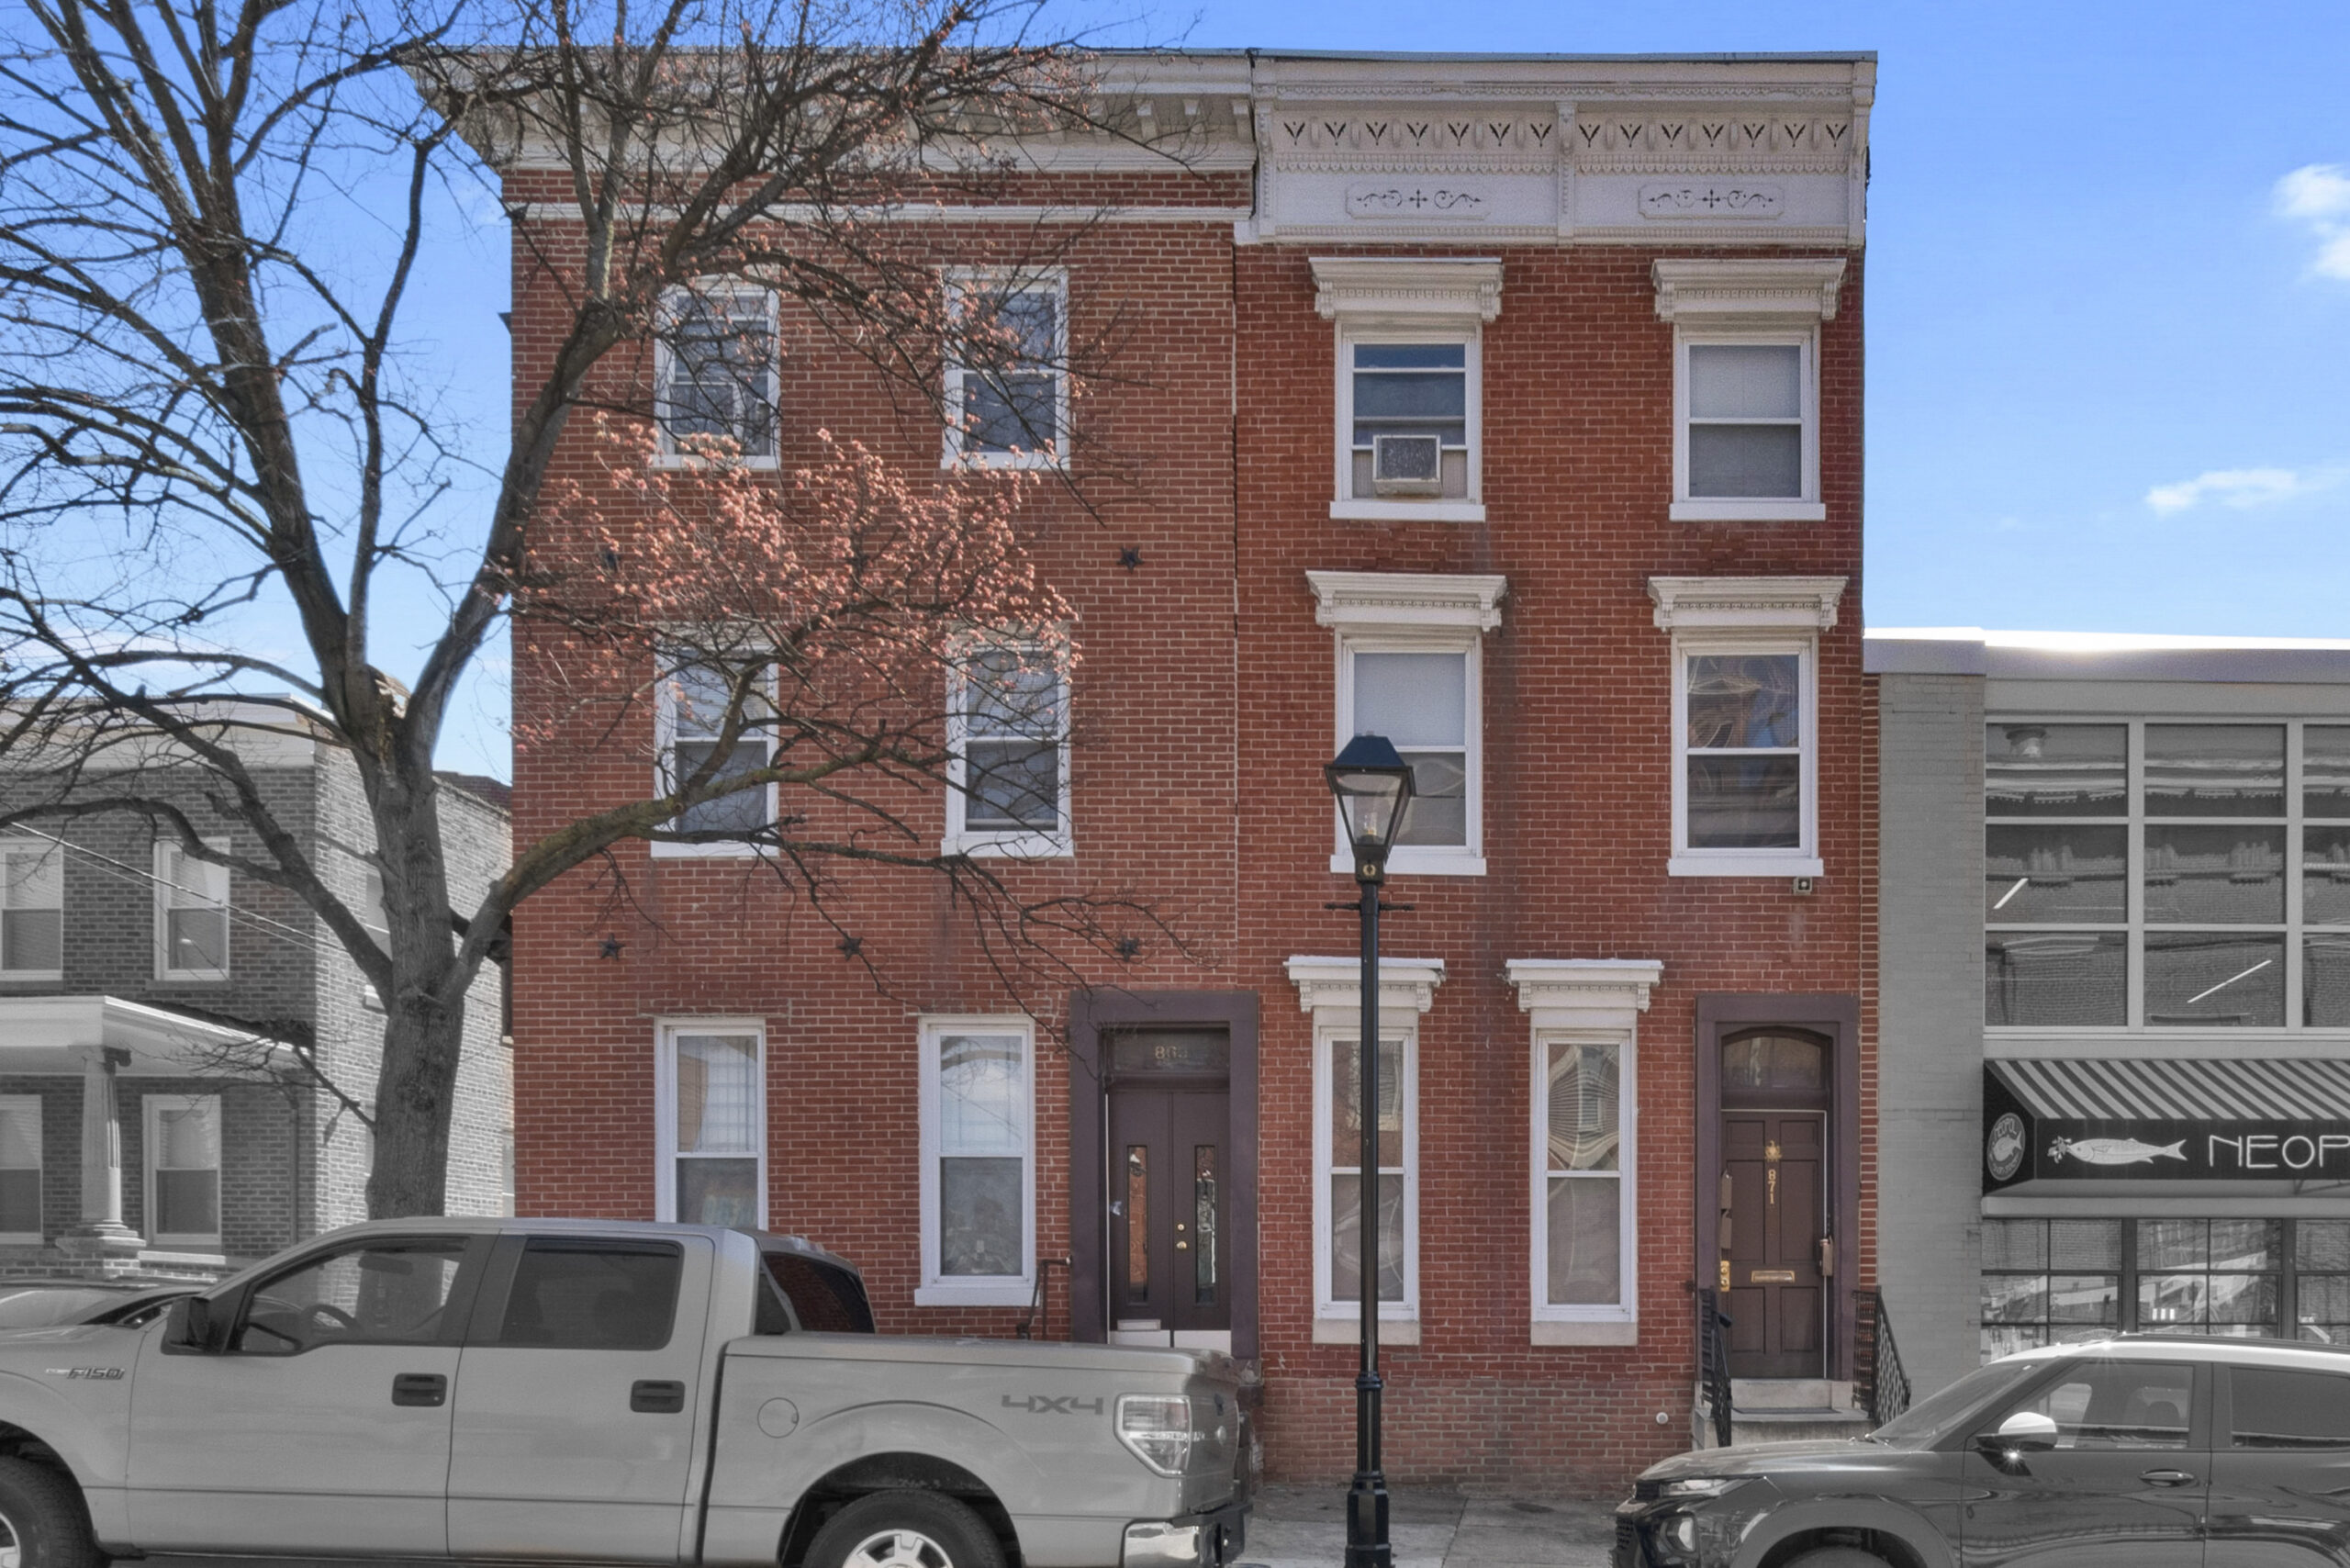 869-871 Hollins Street:  8 Apartments in Historic Hollins Market